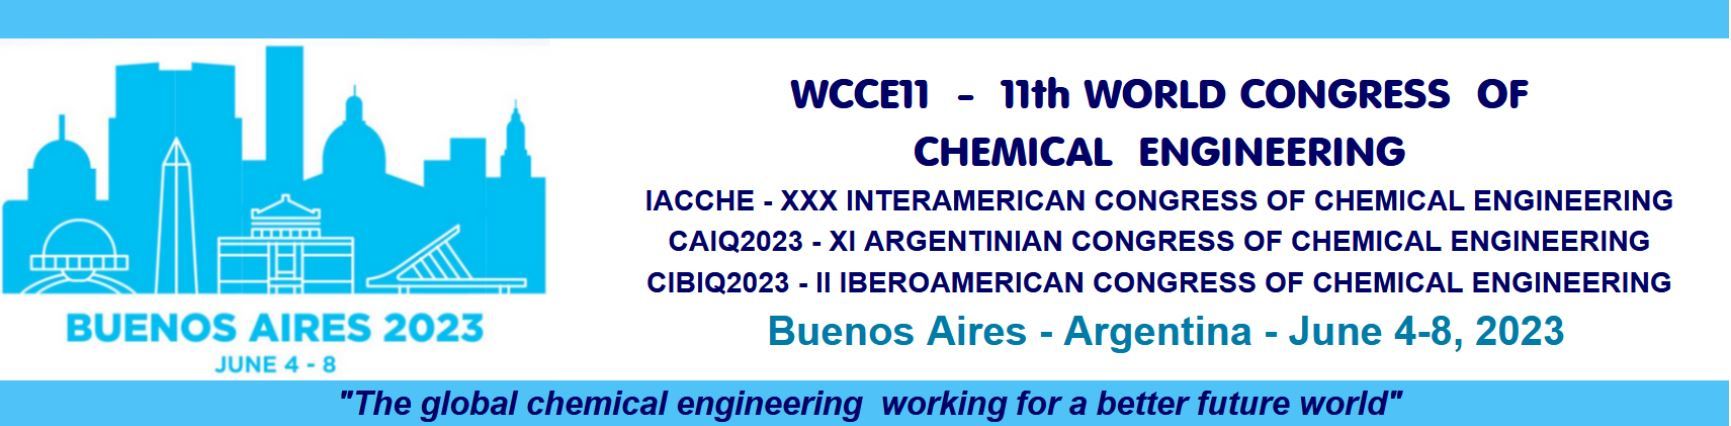 11th World Congress of Chemical Engineering - WCCE11